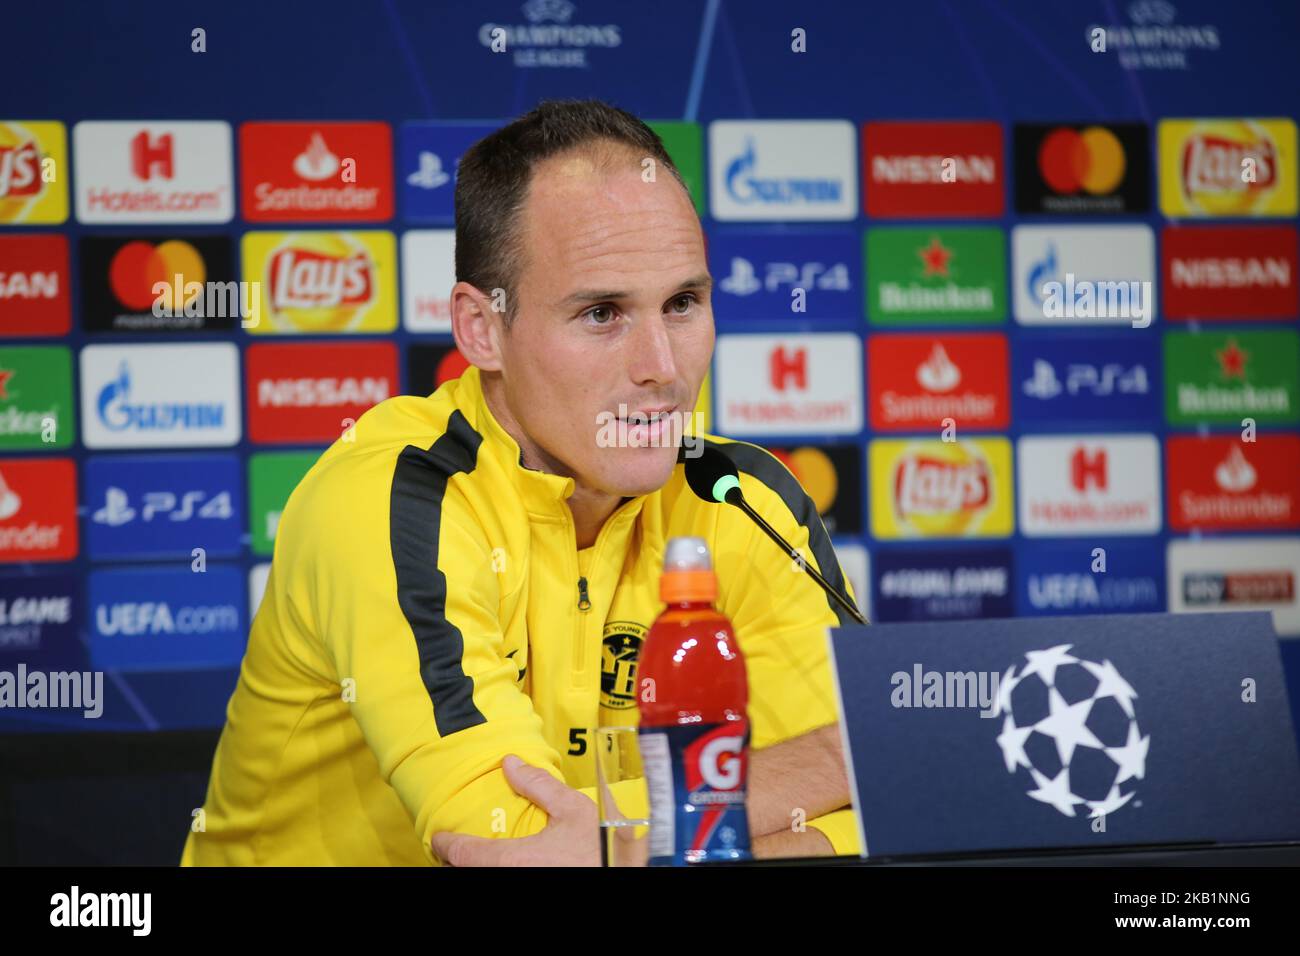 Steve von Bergen (Berner Sport Club Young Boys) during the press conference on the eve of the UEFA Champions League match between Juventus FC and Berner Sport Club Young Boys at Allianz Stadium on October 01l, 2018 in Turin, Italy. (Photo by Massimiliano Ferraro/NurPhoto) Stock Photo